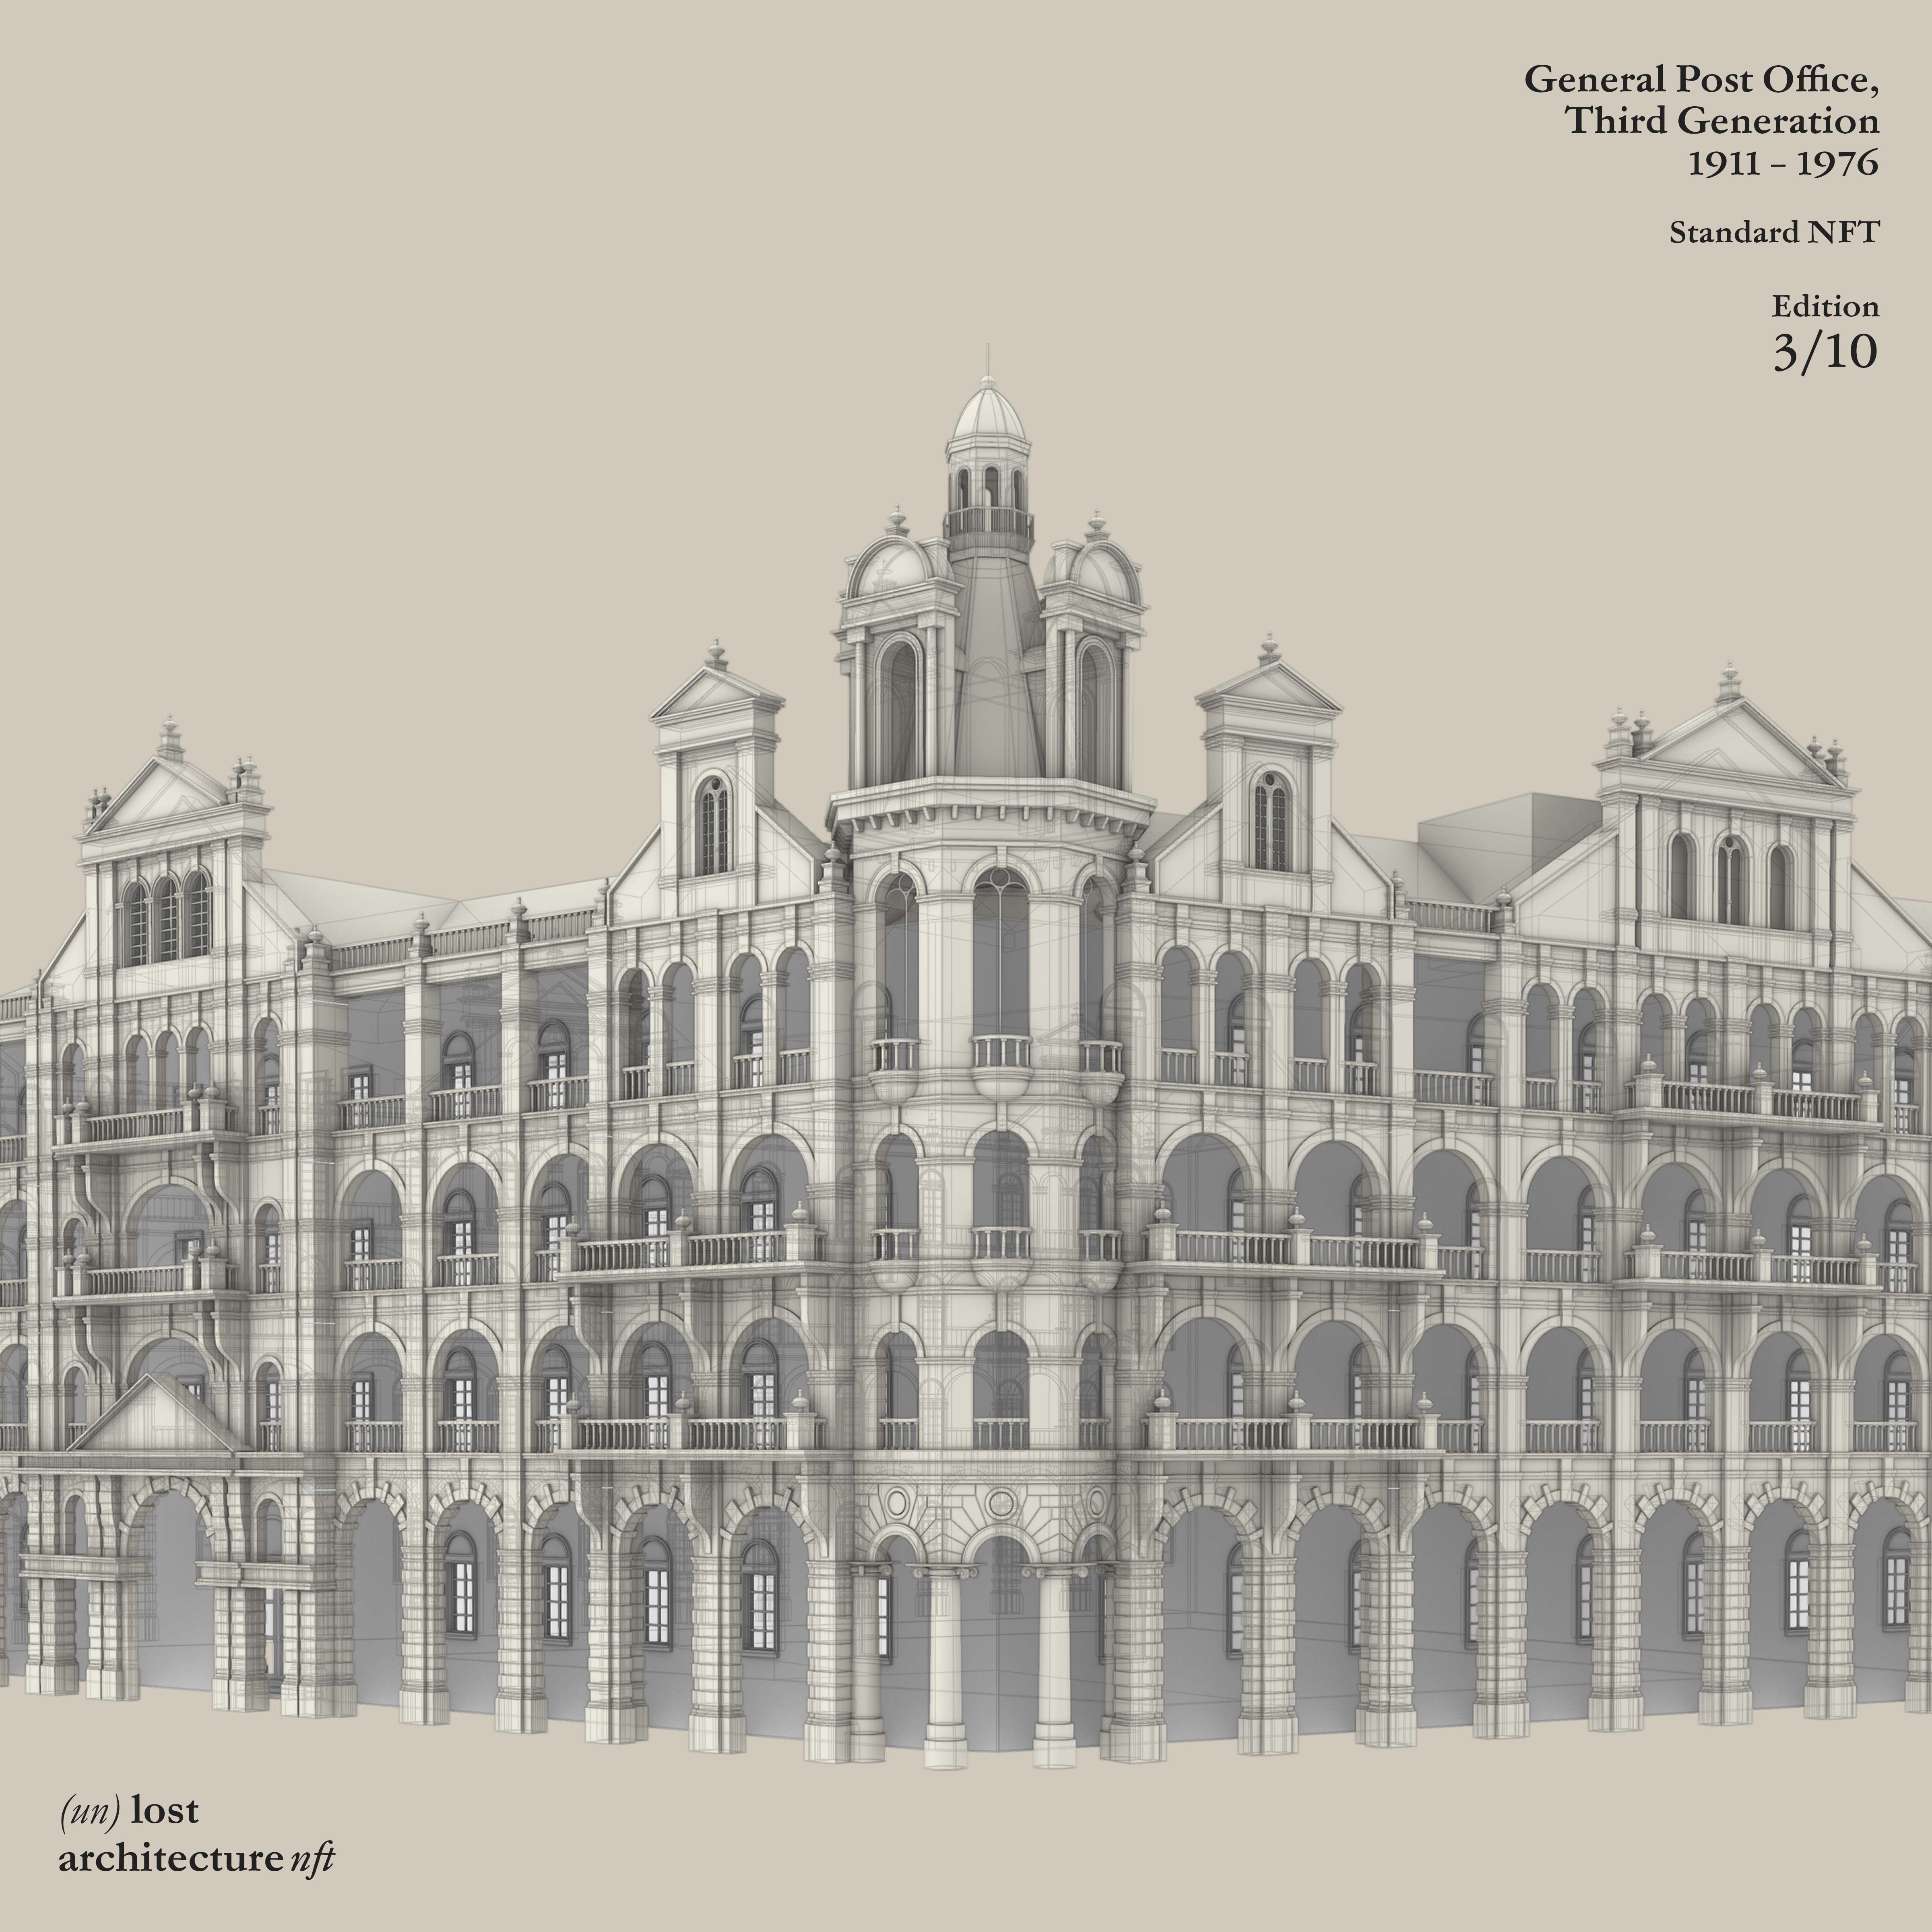 General Post Office, Third Generation - Standard Version, Edition 3 of 10